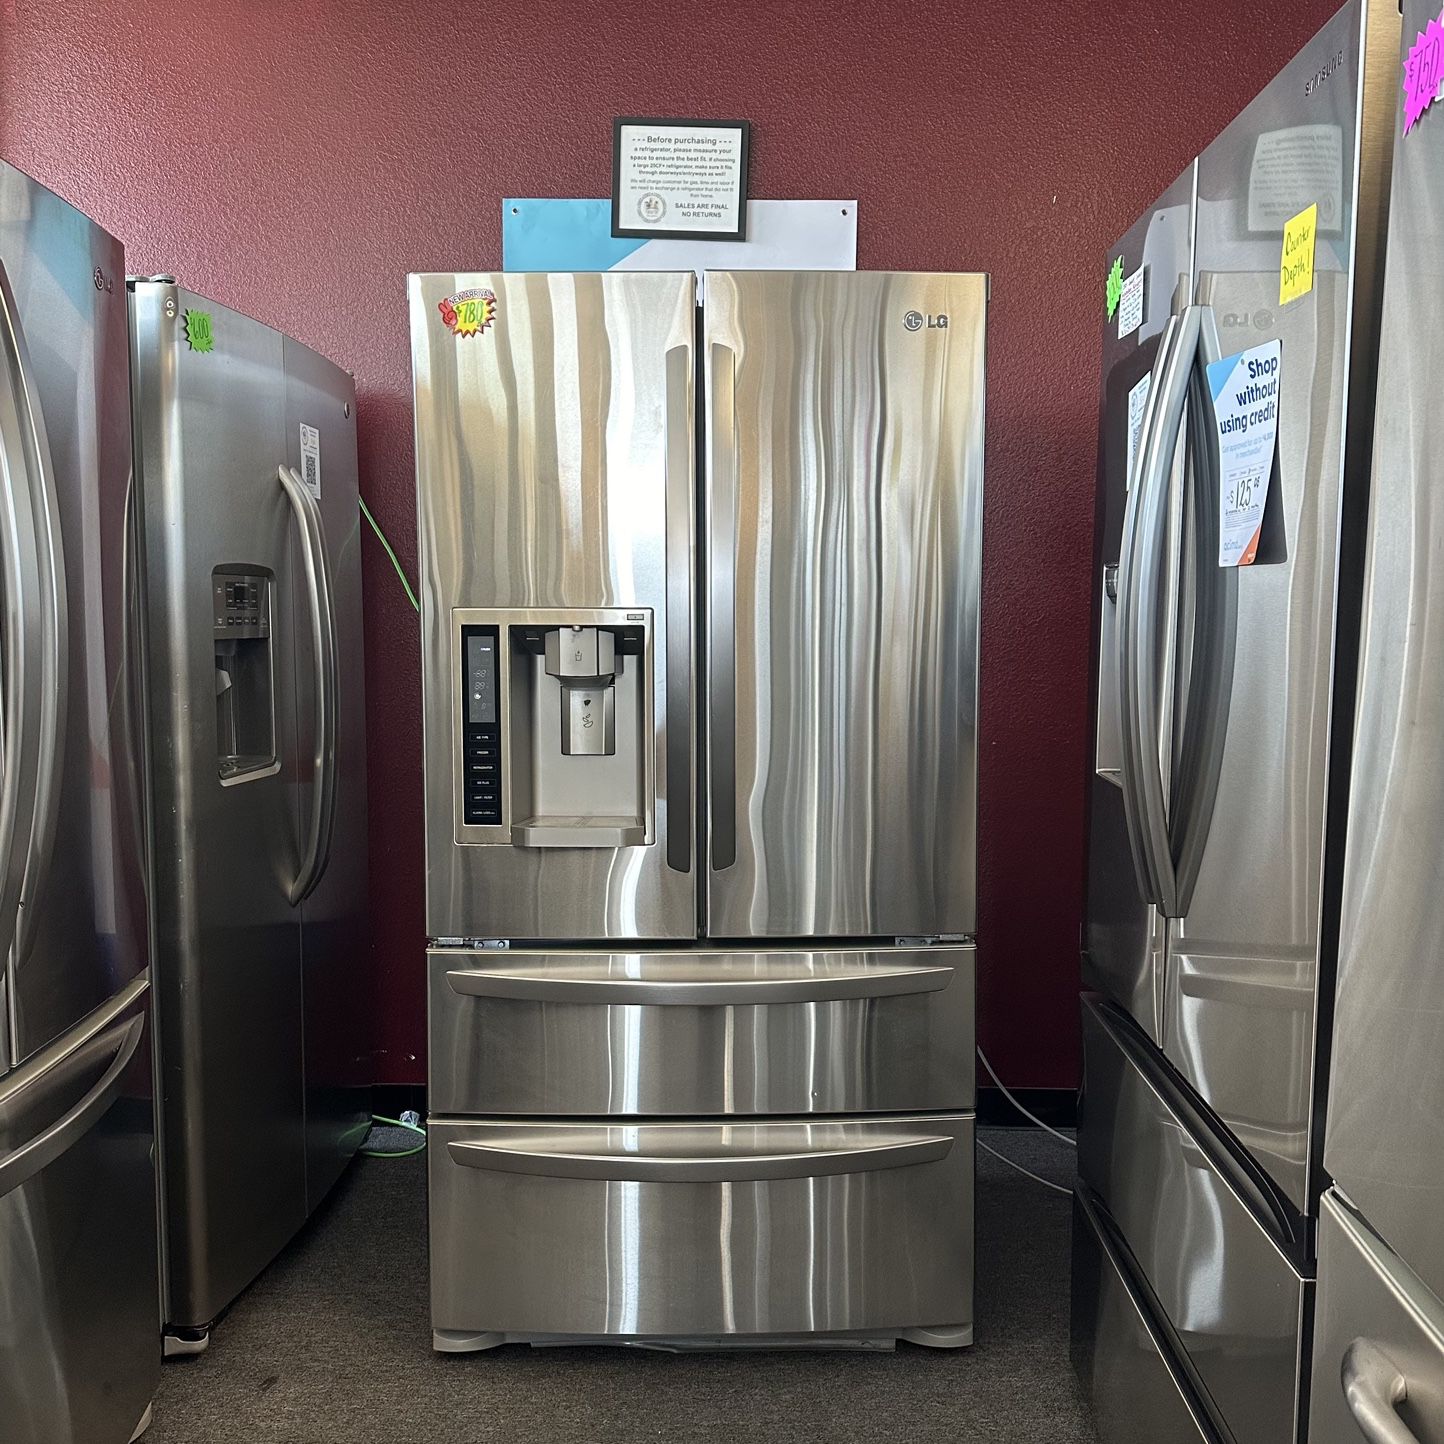 Stainless Steel LG Refrigerator With Dual Freezer Drawers